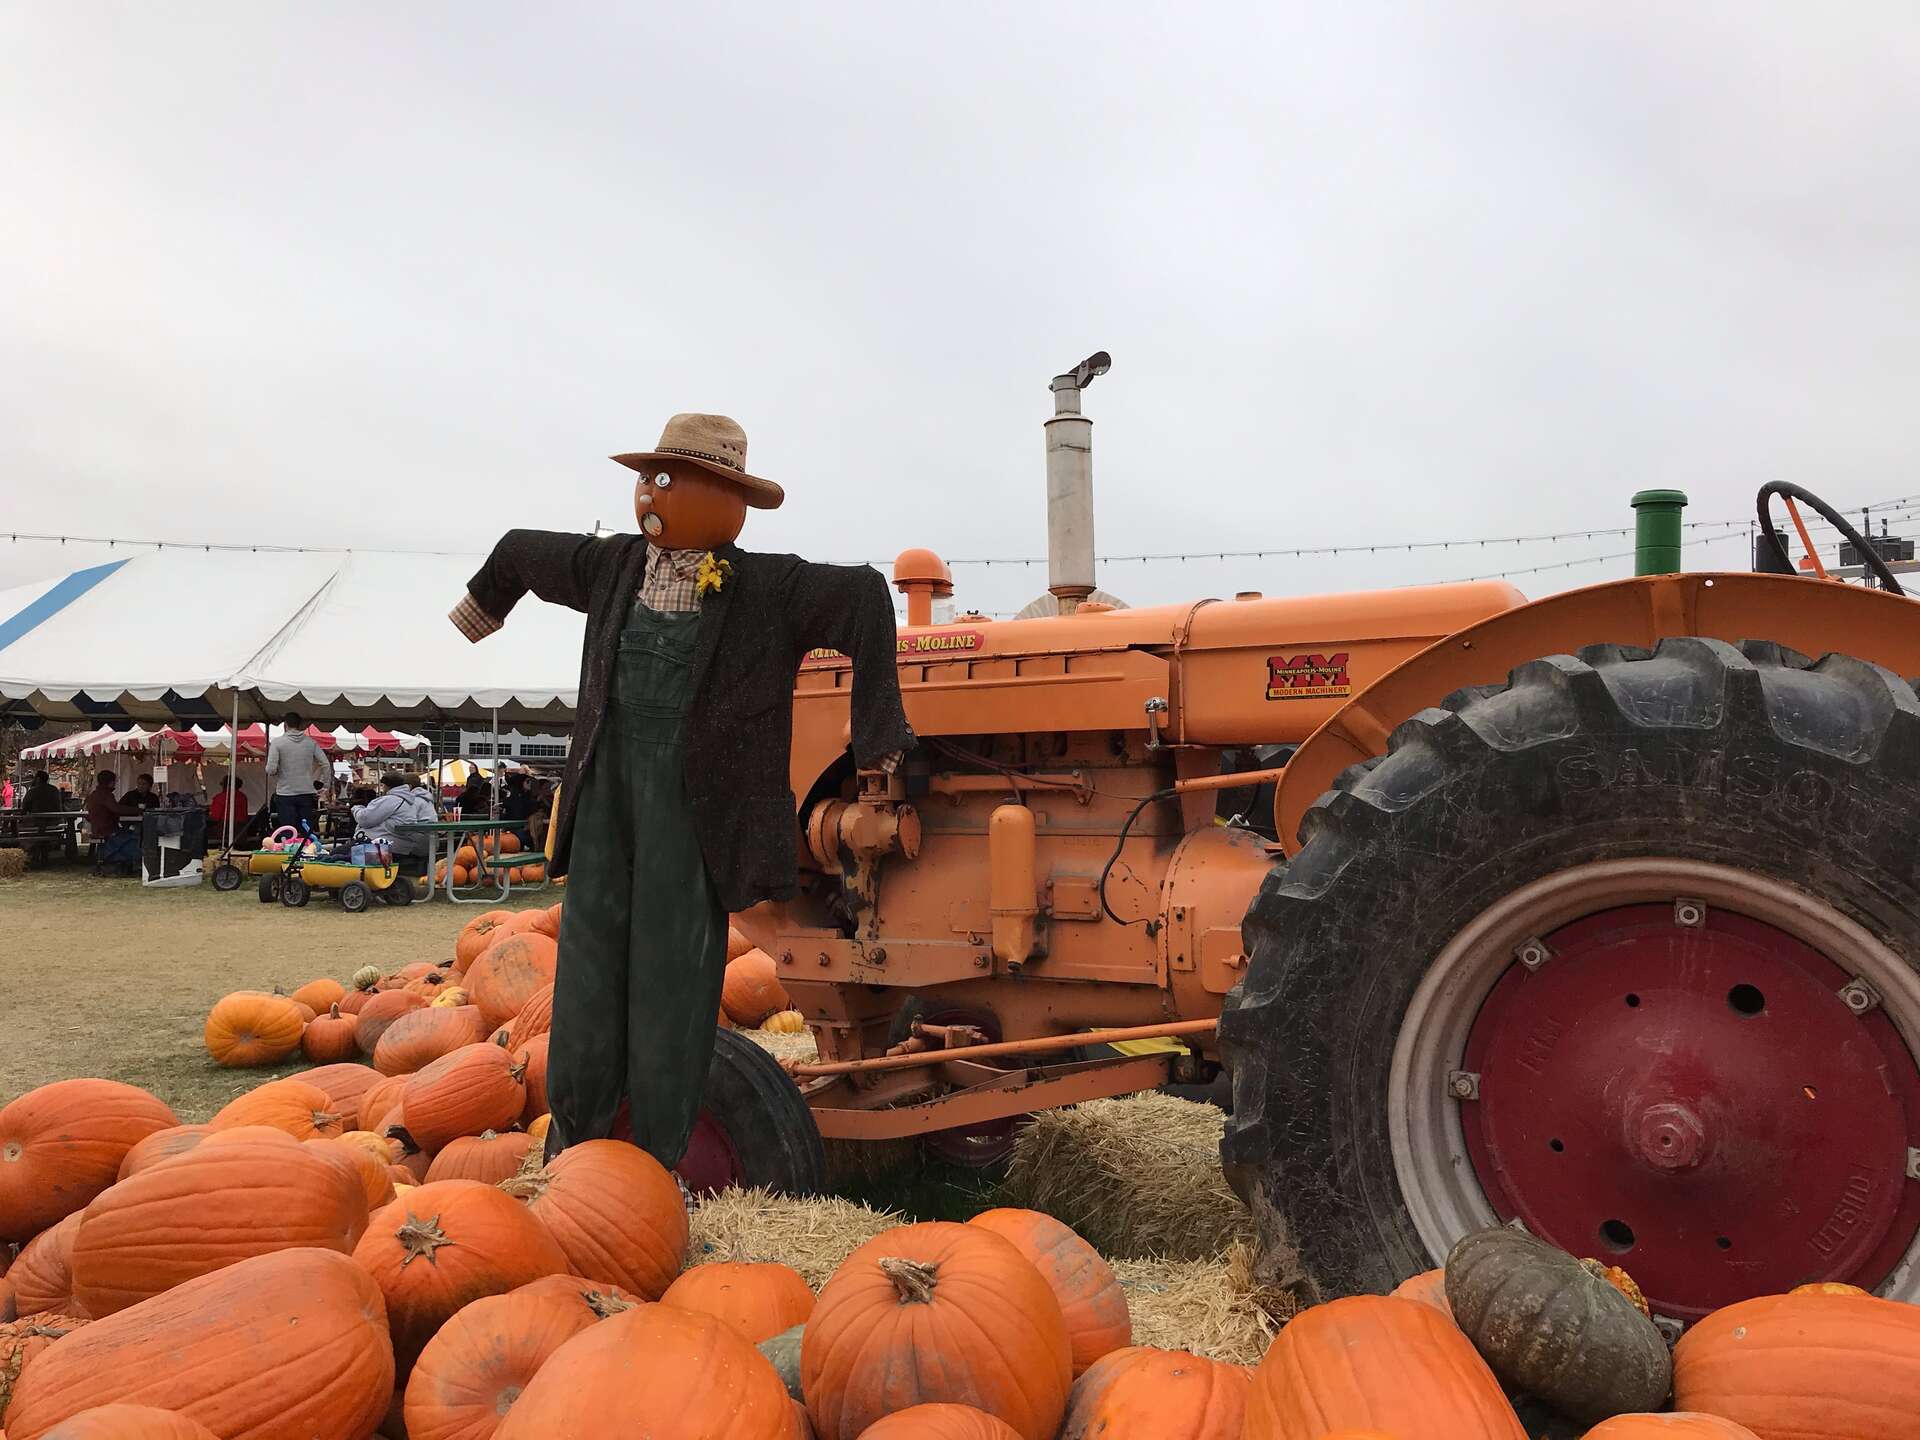 Cornbelly's scarecrow and tractor next to a pumpkin patch